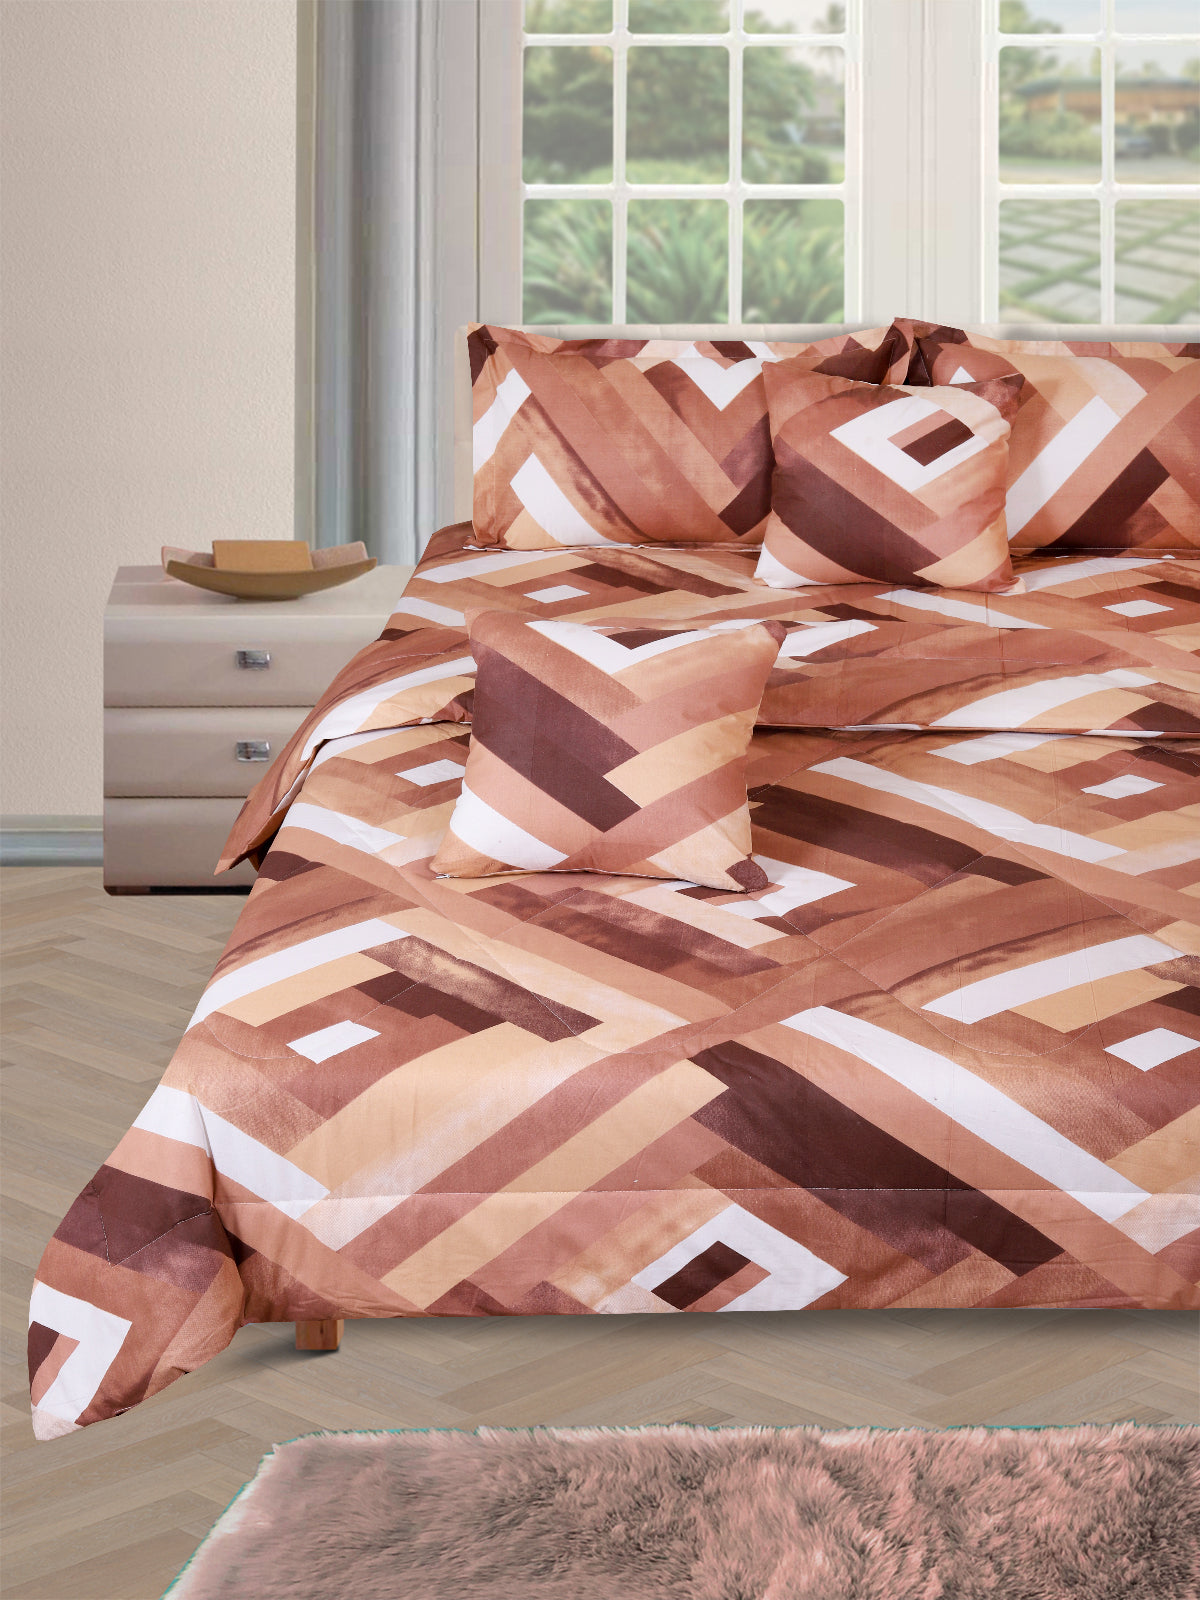 Brown Geometric Printed Cotton Double Queen Bedding Set With Pillow Cover